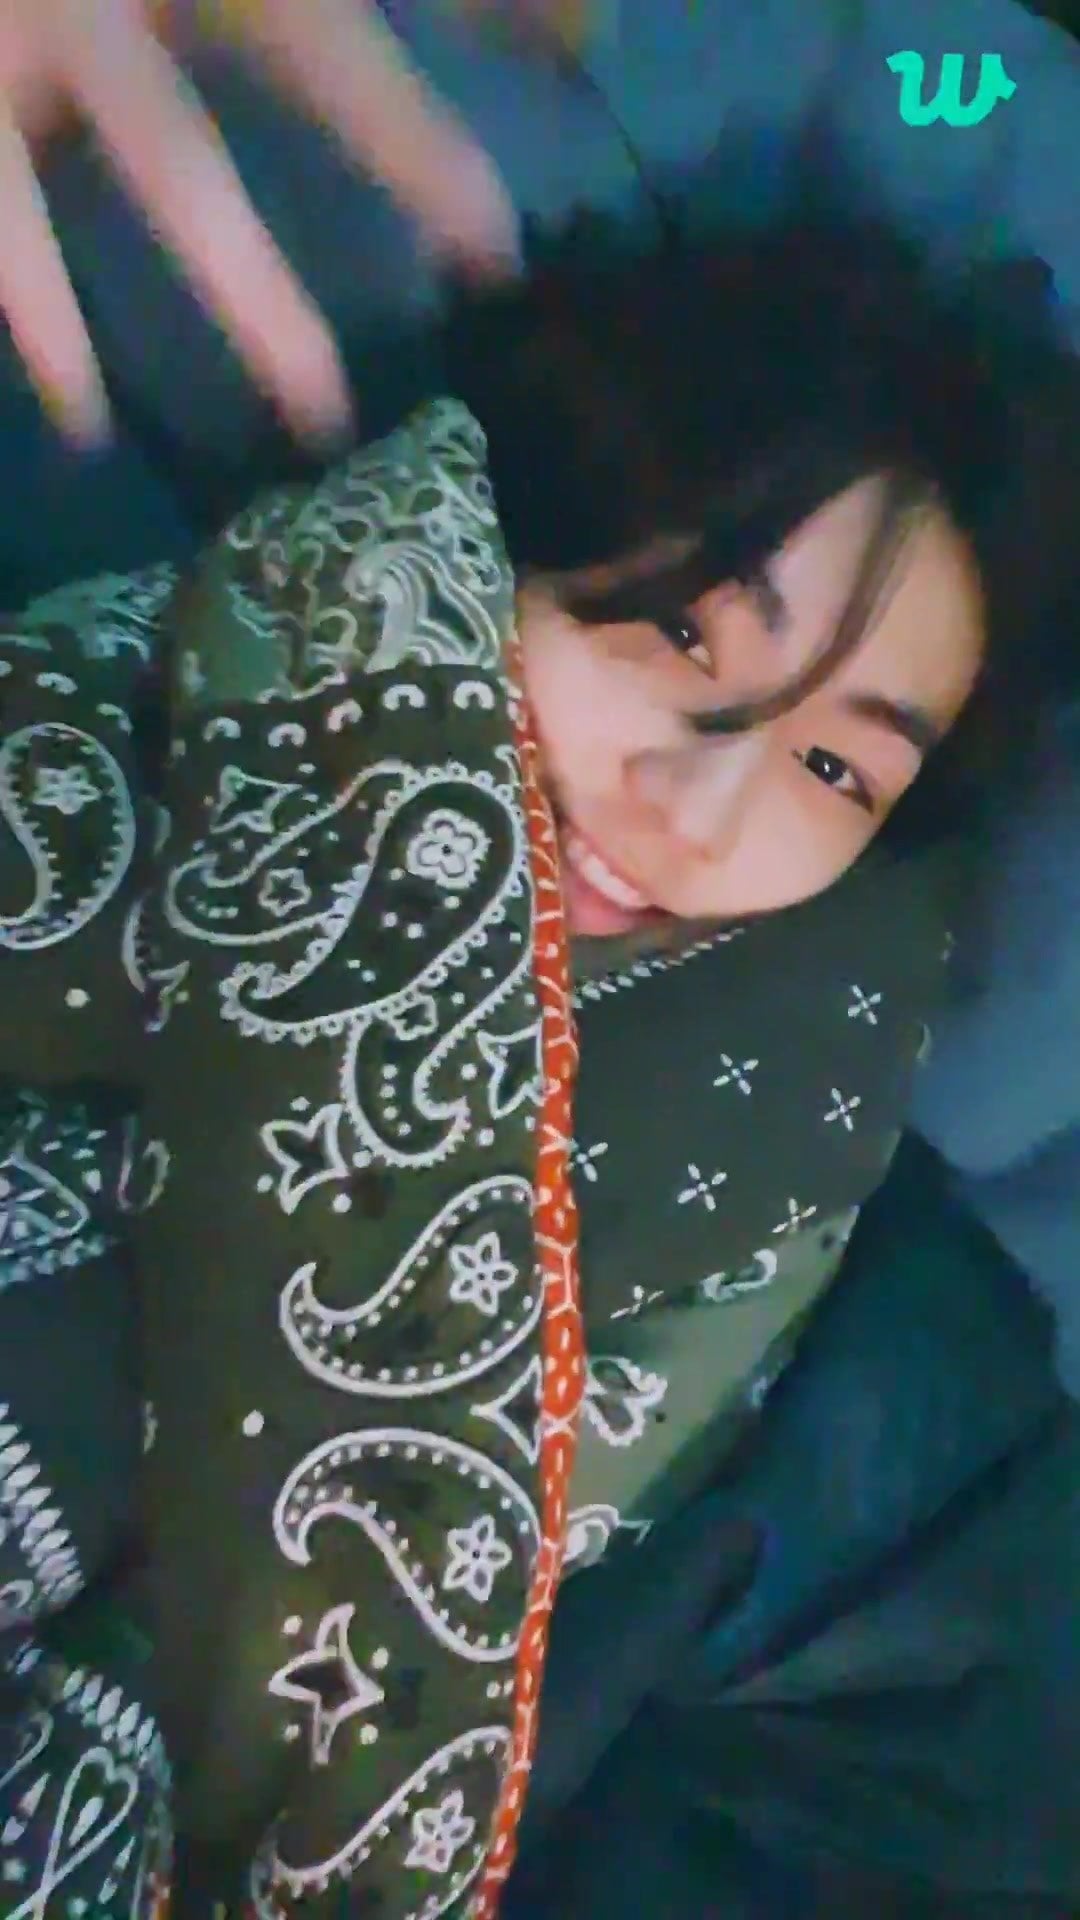 240107 [Weverse Live: Jungwon] garden of afternoon